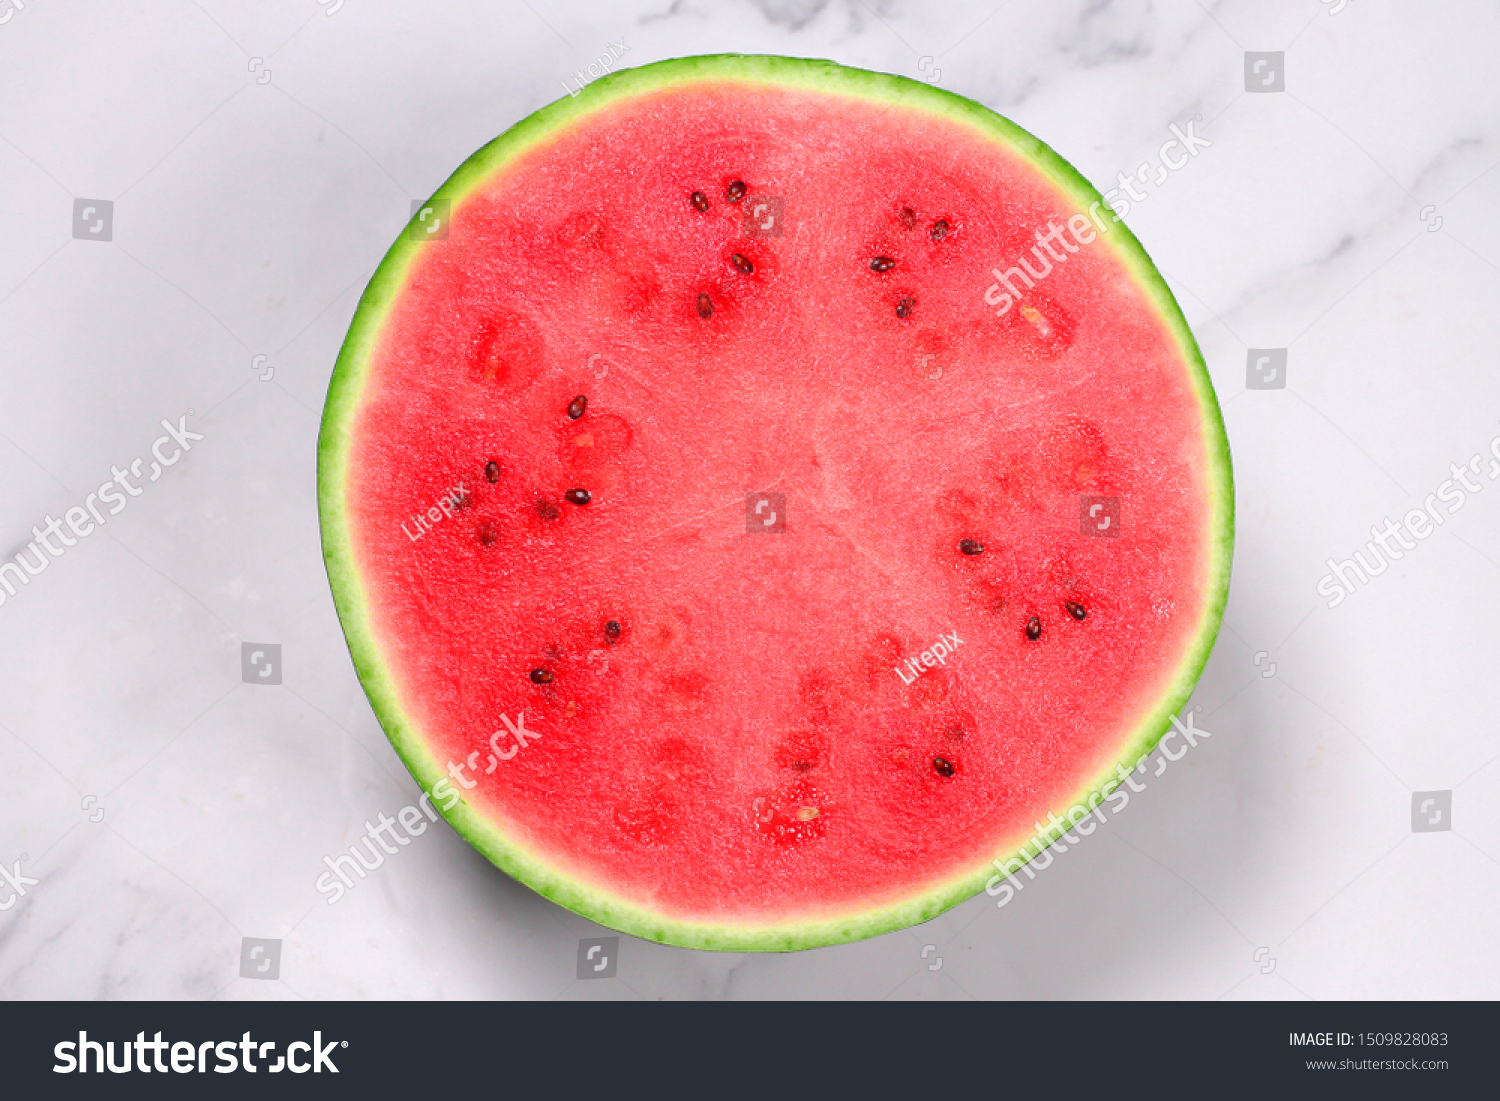 Cut Slice Watermelon Inside View Isolated Stock Photo 1509828083 |  Shutterstock